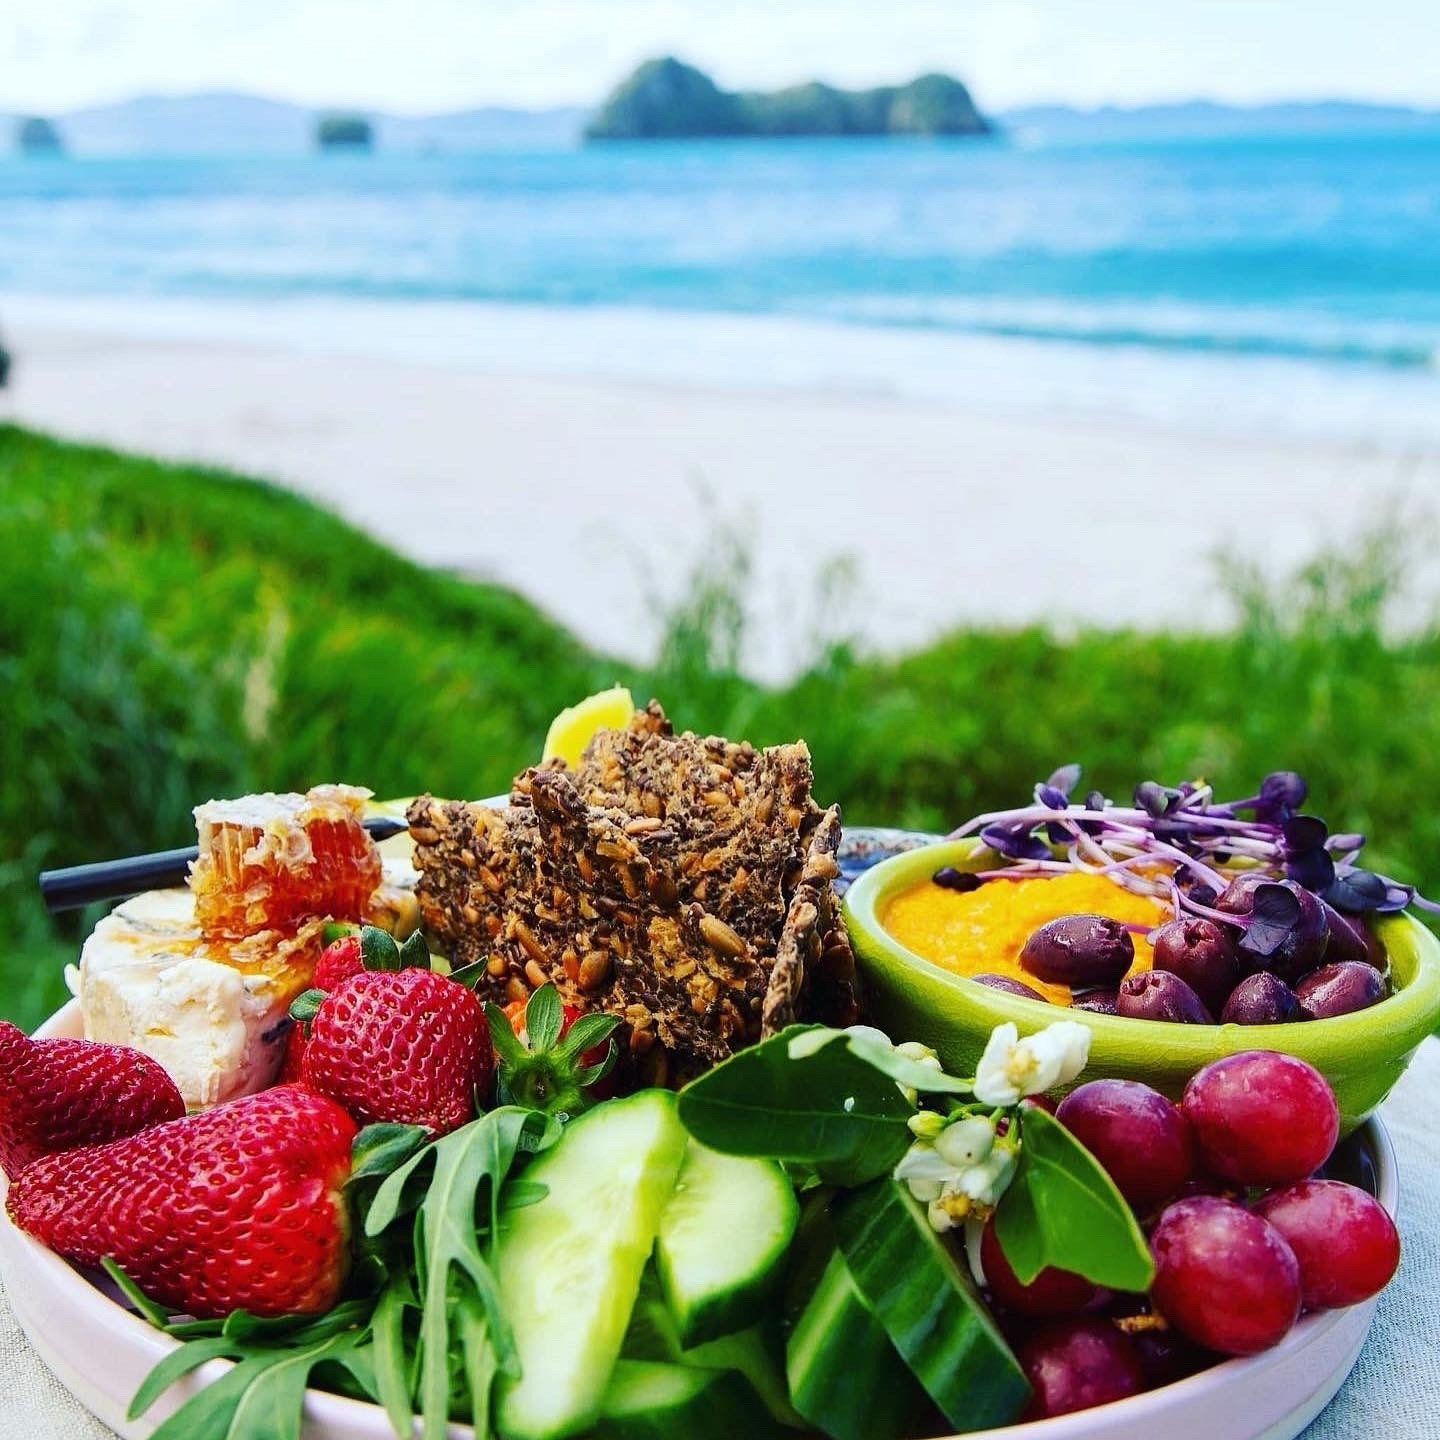 How about a delish grazing platter upon arrival to your accom! Its all about the lush details that make up your full elopement experience! Locally sourced fresh ingredients and condiments, to sustain you both, as your love-story unfolds on the gorgeo